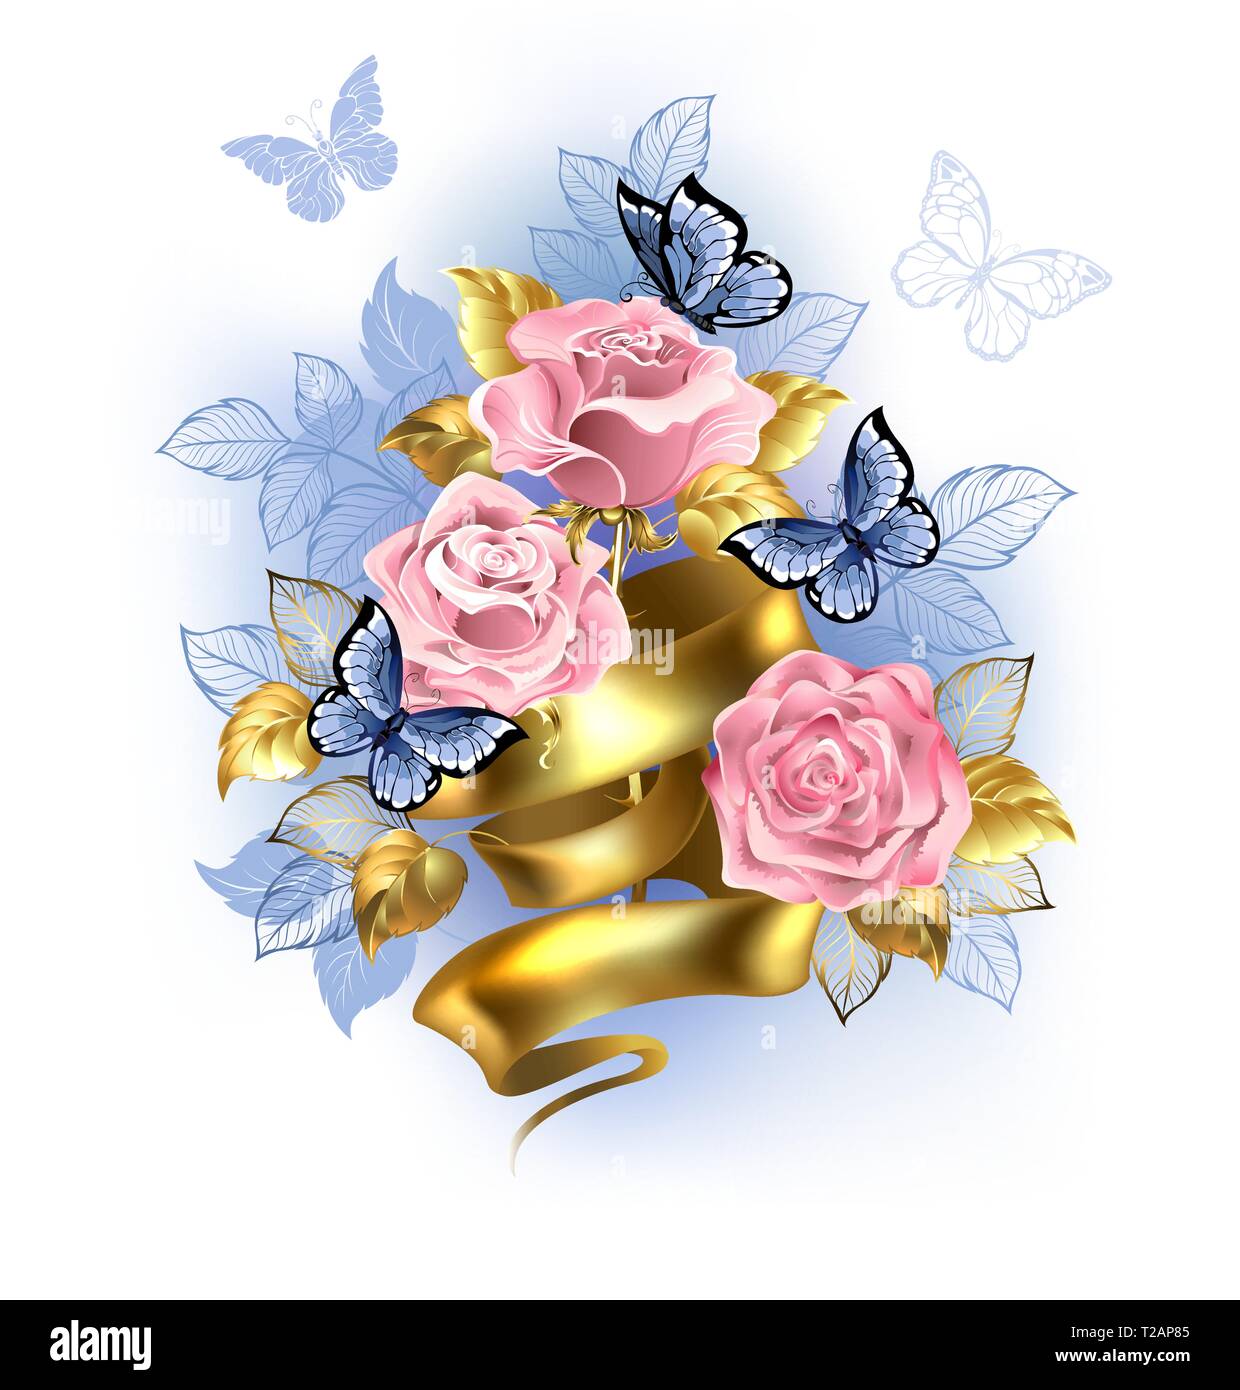 Gentle pink roses entwined with  gold ribbon with blue butterflies on white background. Rose Quartz and serenity. Stock Vector